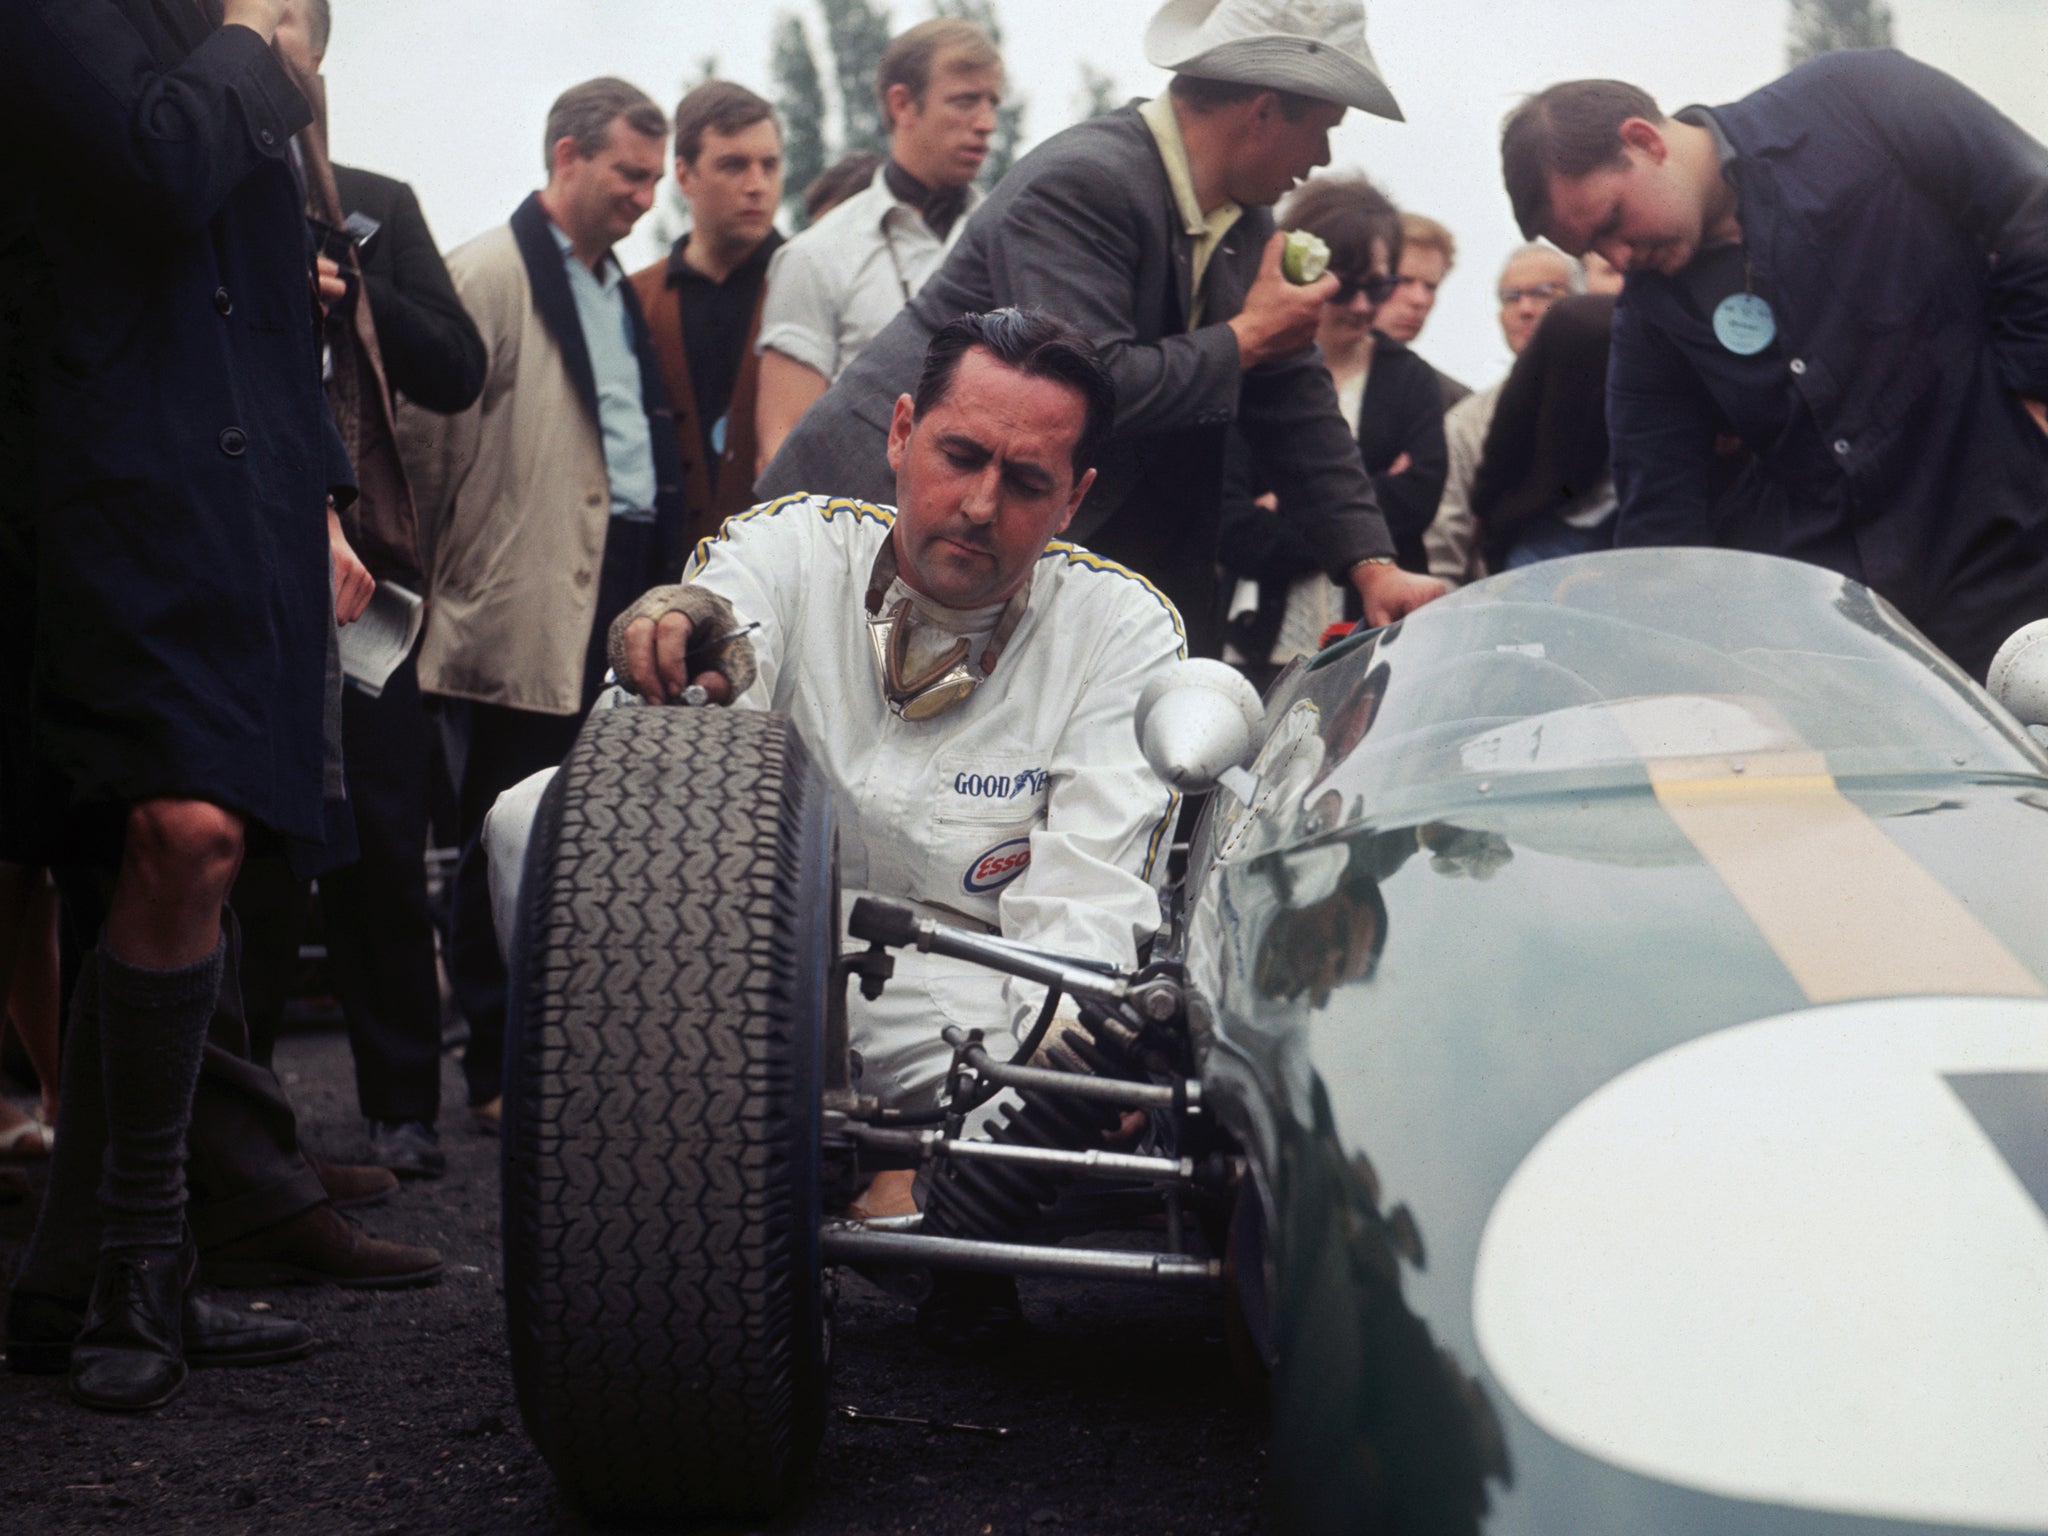 Australian racing driver Jack Brabham checking a tyre on his car at Crystal Palace, London, 1969.